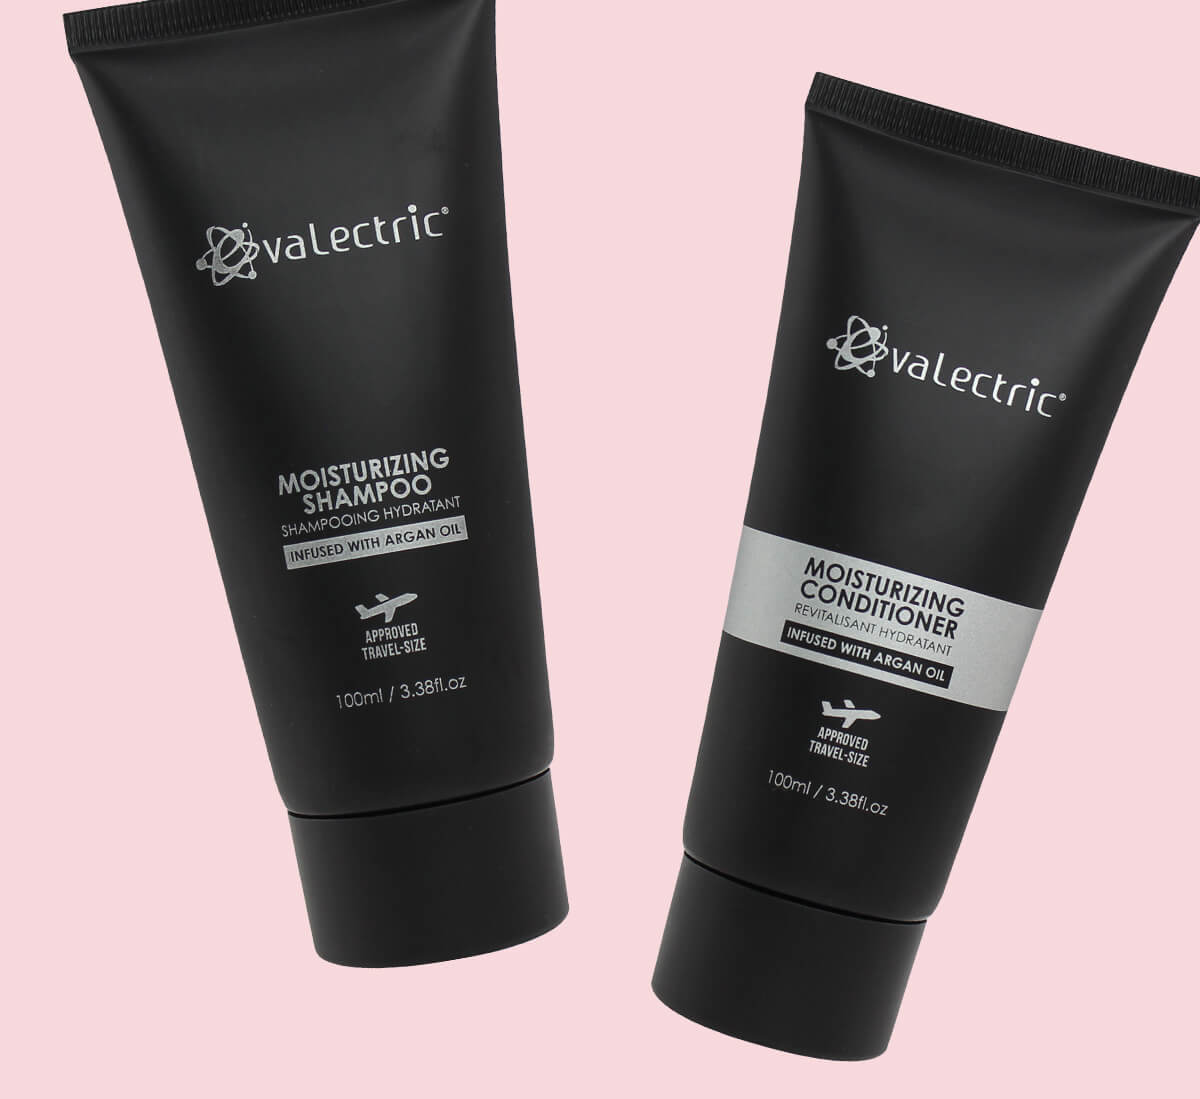 Evalectric shampoo and conditioner to care for extensions